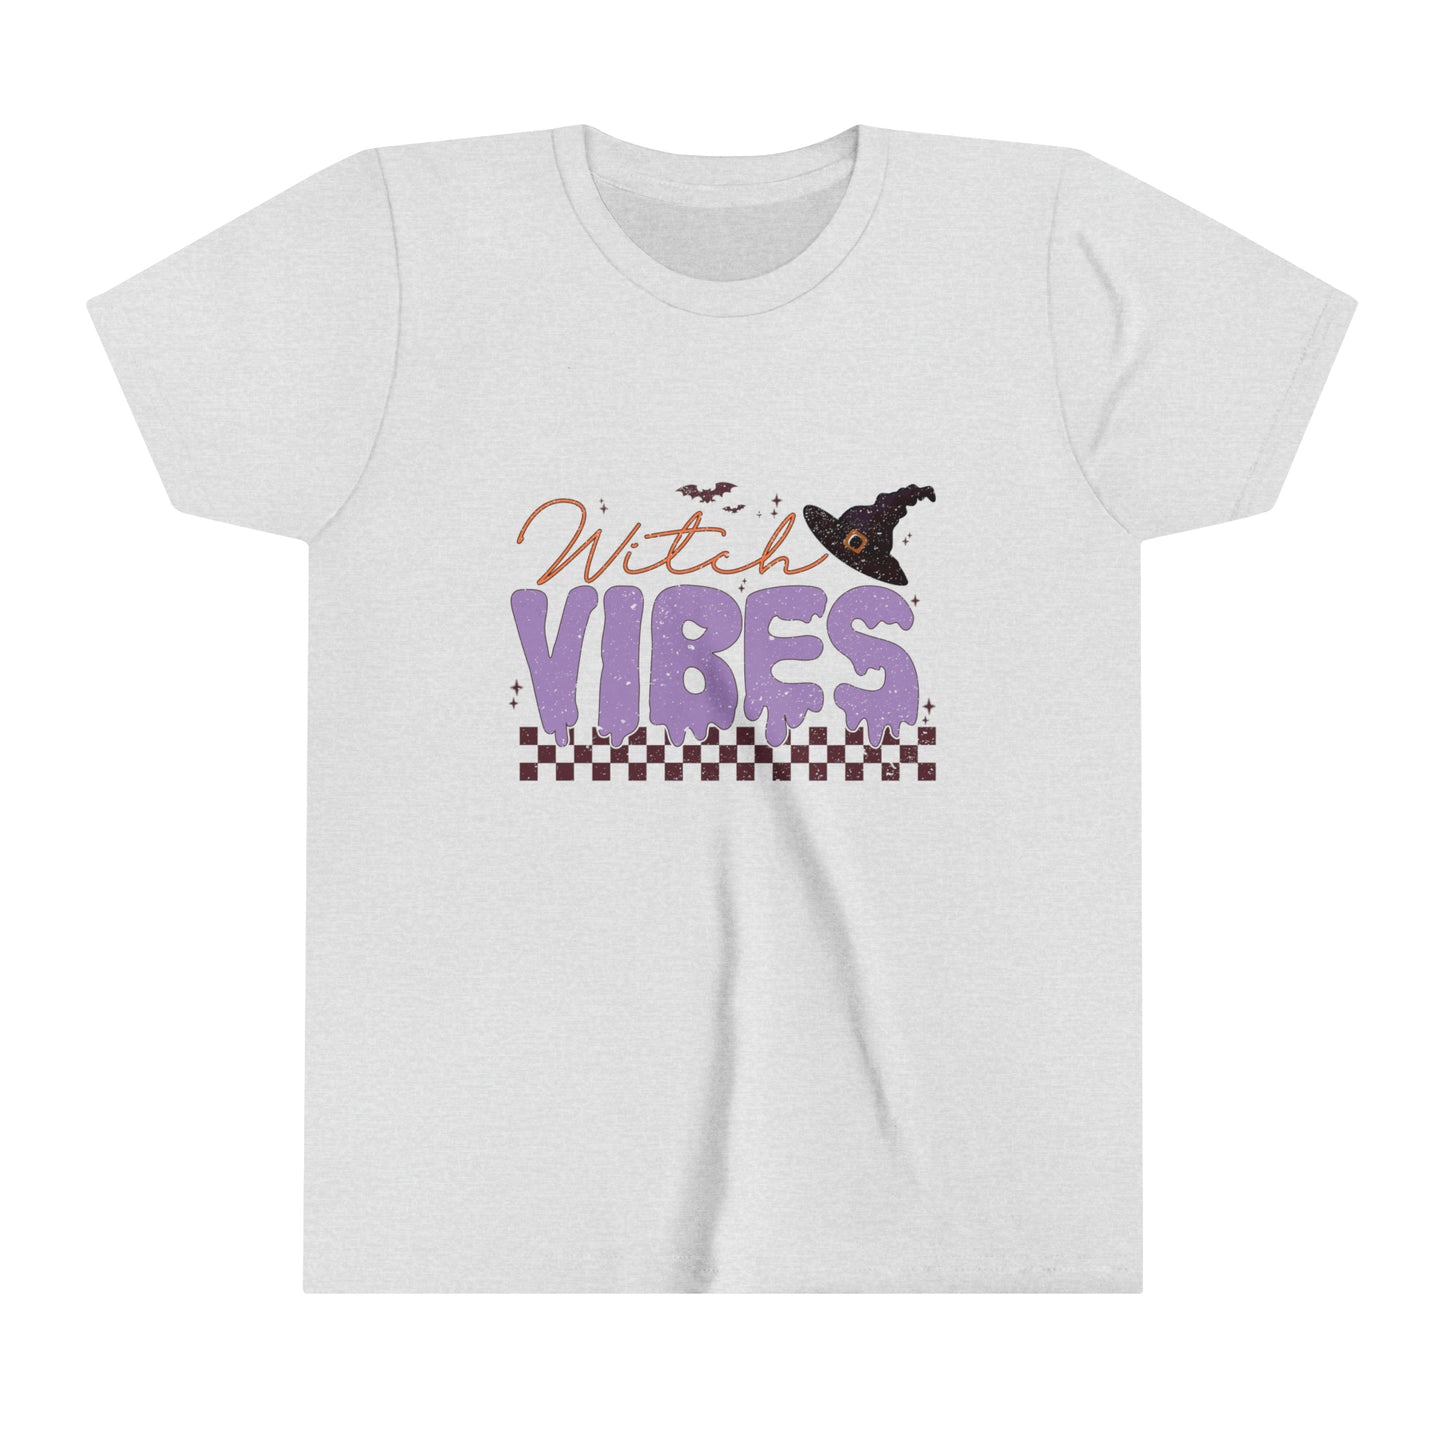 Witch Vibes Girl's Youth Short Sleeve Tee